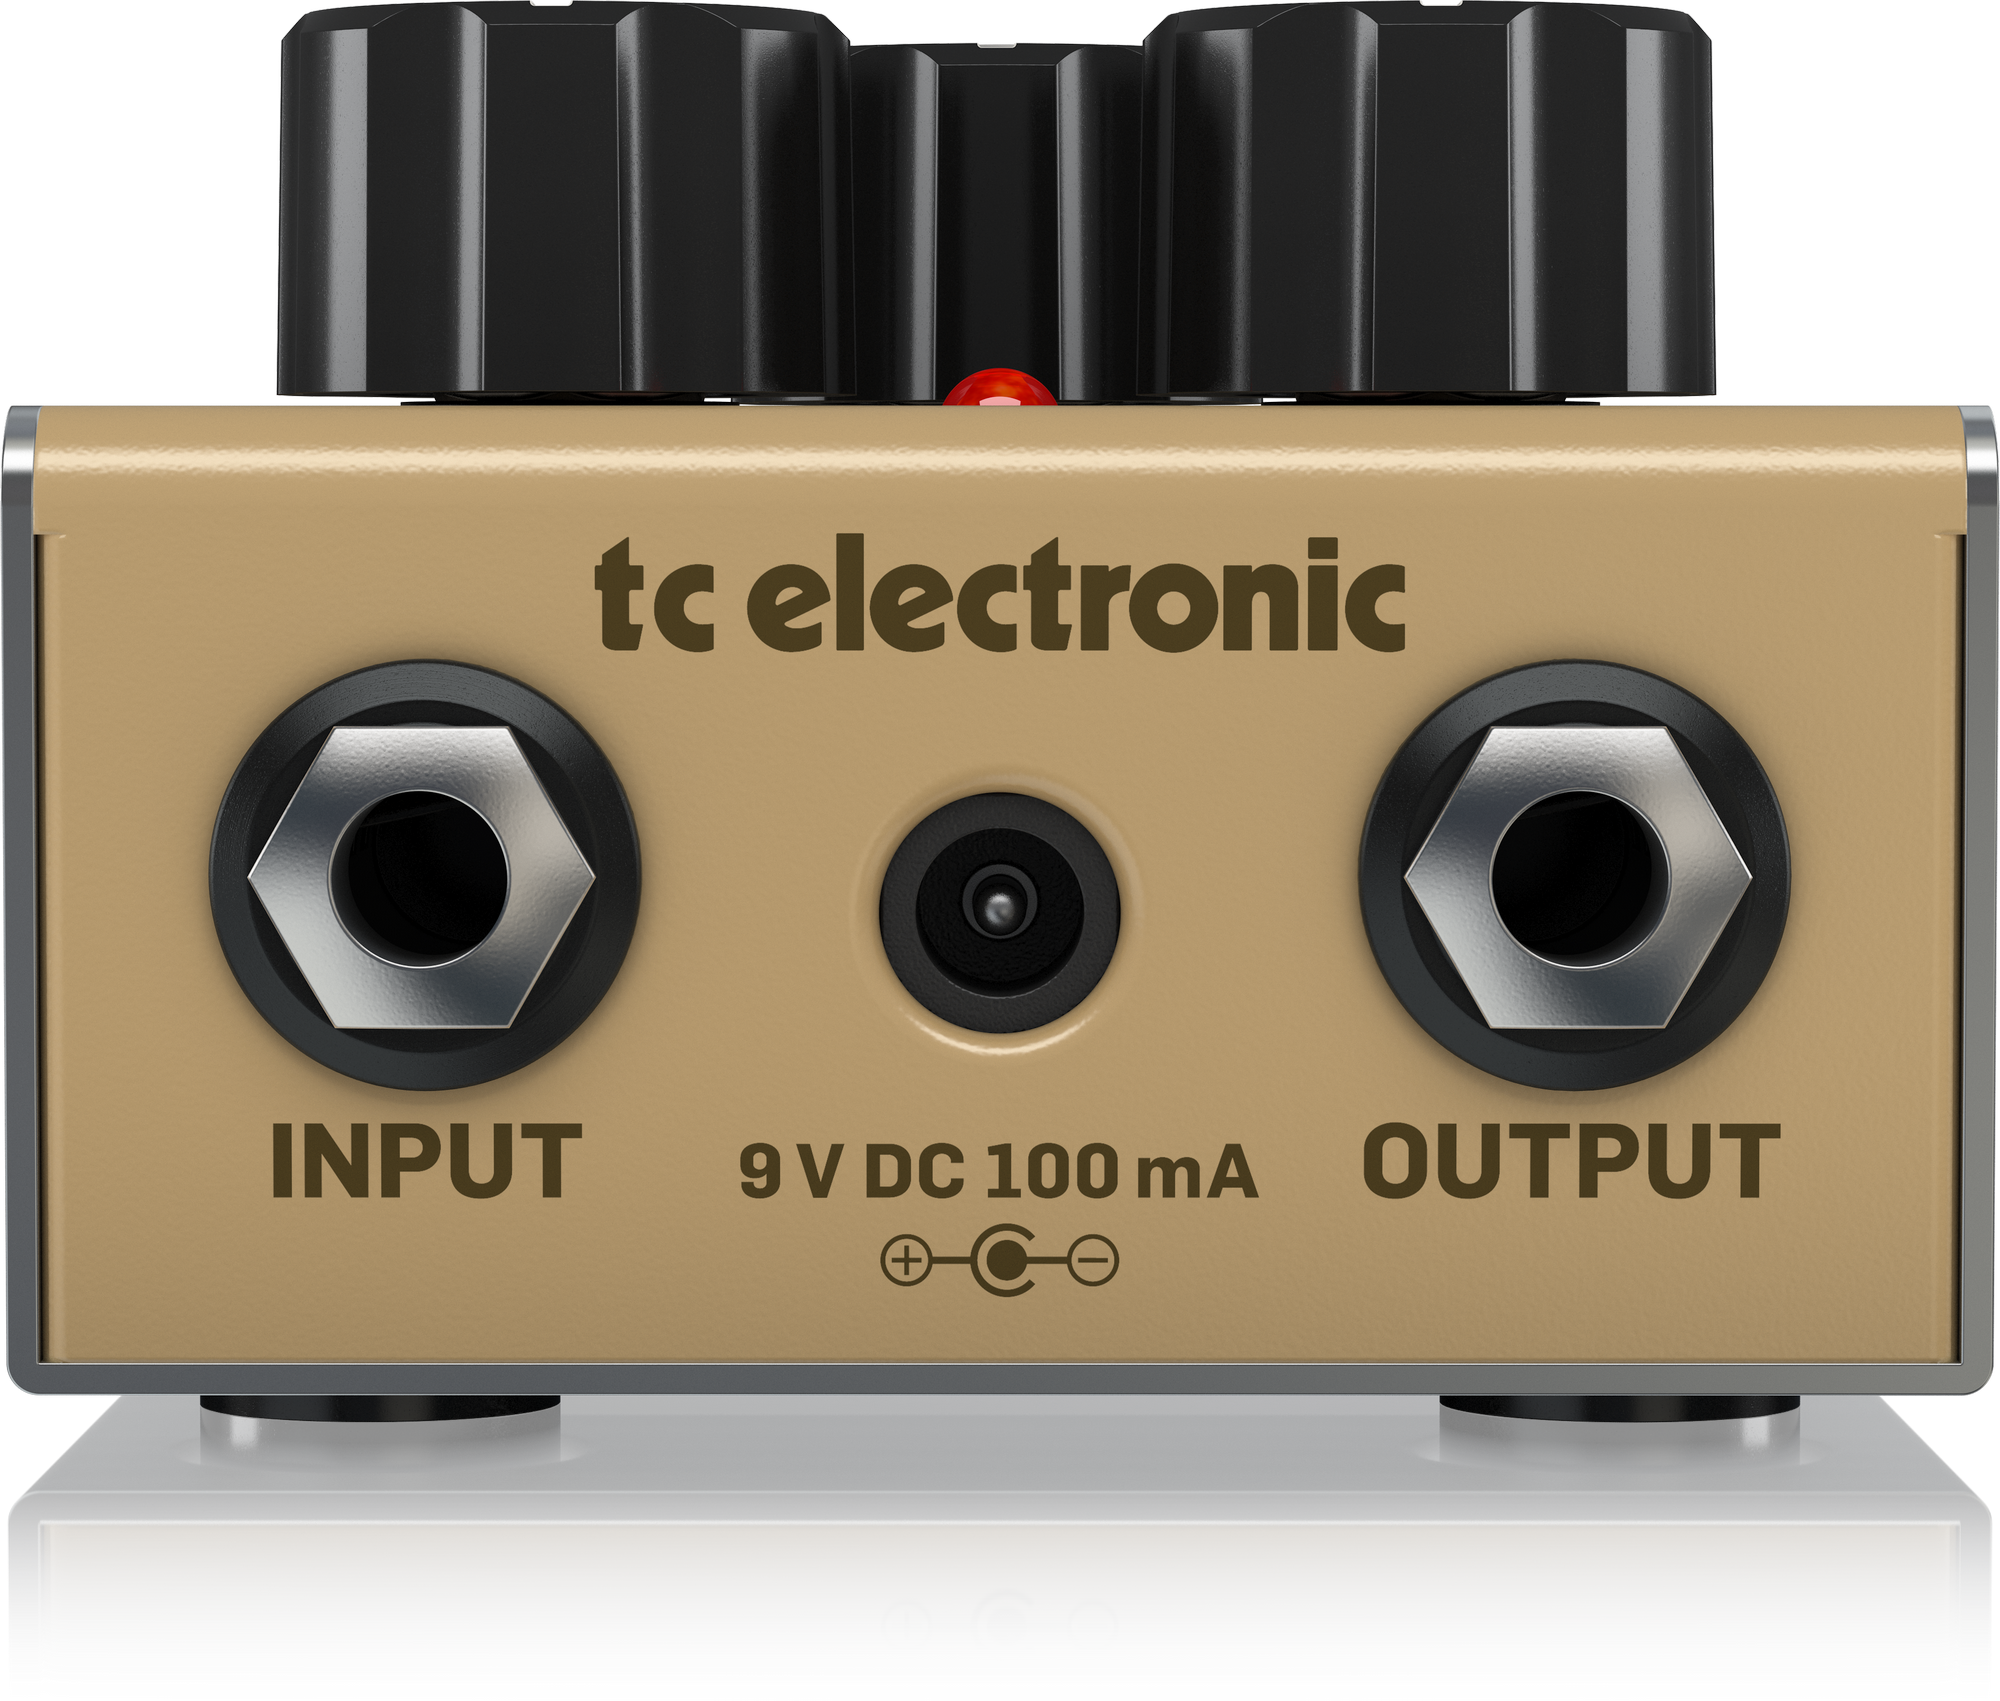 TC Electronic Drip Spring Reverb Adjustable Dwell/Mix and Tone for Sparkling Reverb Sound, TC ELECTRONIC, EFFECTS, tc-electronic-effects-tc-drip-spring-reverb, ZOSO MUSIC SDN BHD